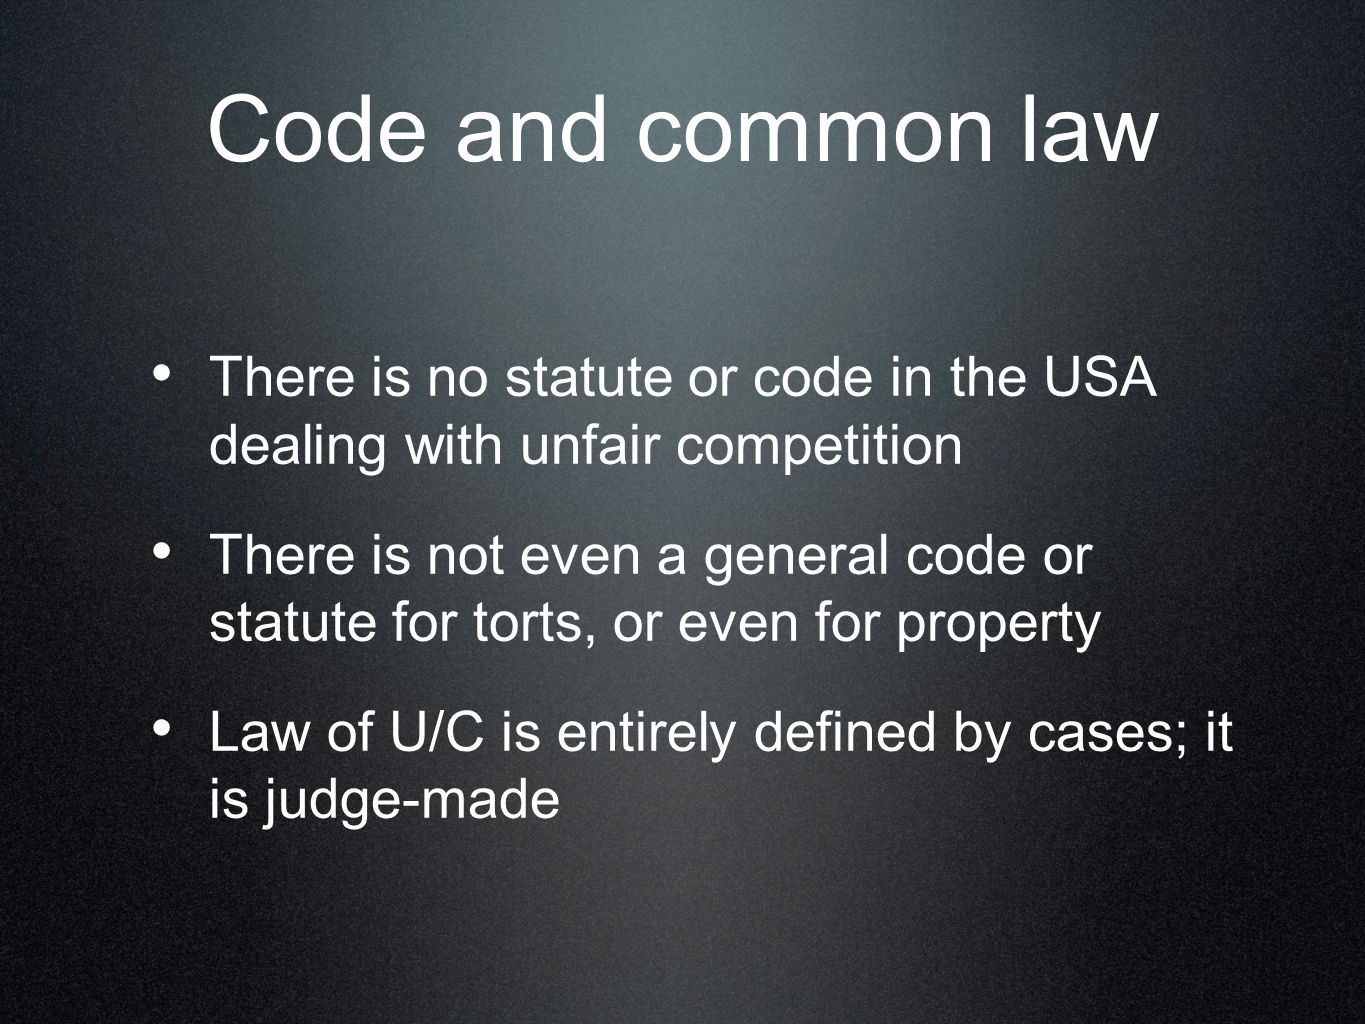 Code and common law There is no statute or code in the USA dealing with unfair competition There is not even a general code or statute for torts, or even for property Law of U/C is entirely defined by cases; it is judge-made